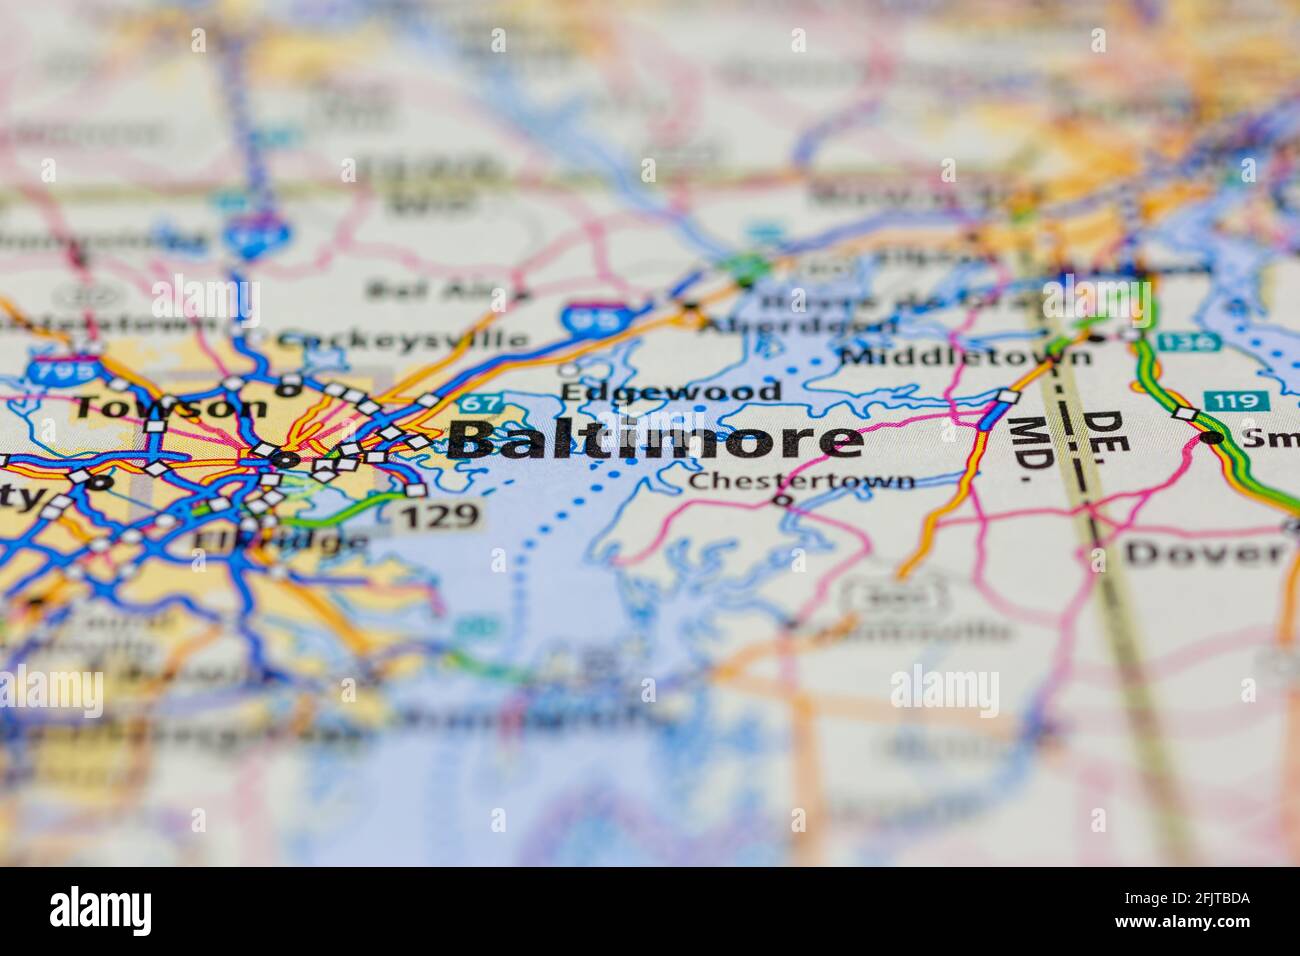 Baltimore Maryland USA and surrounding areas Shown on a road map or Geography map Stock Photo